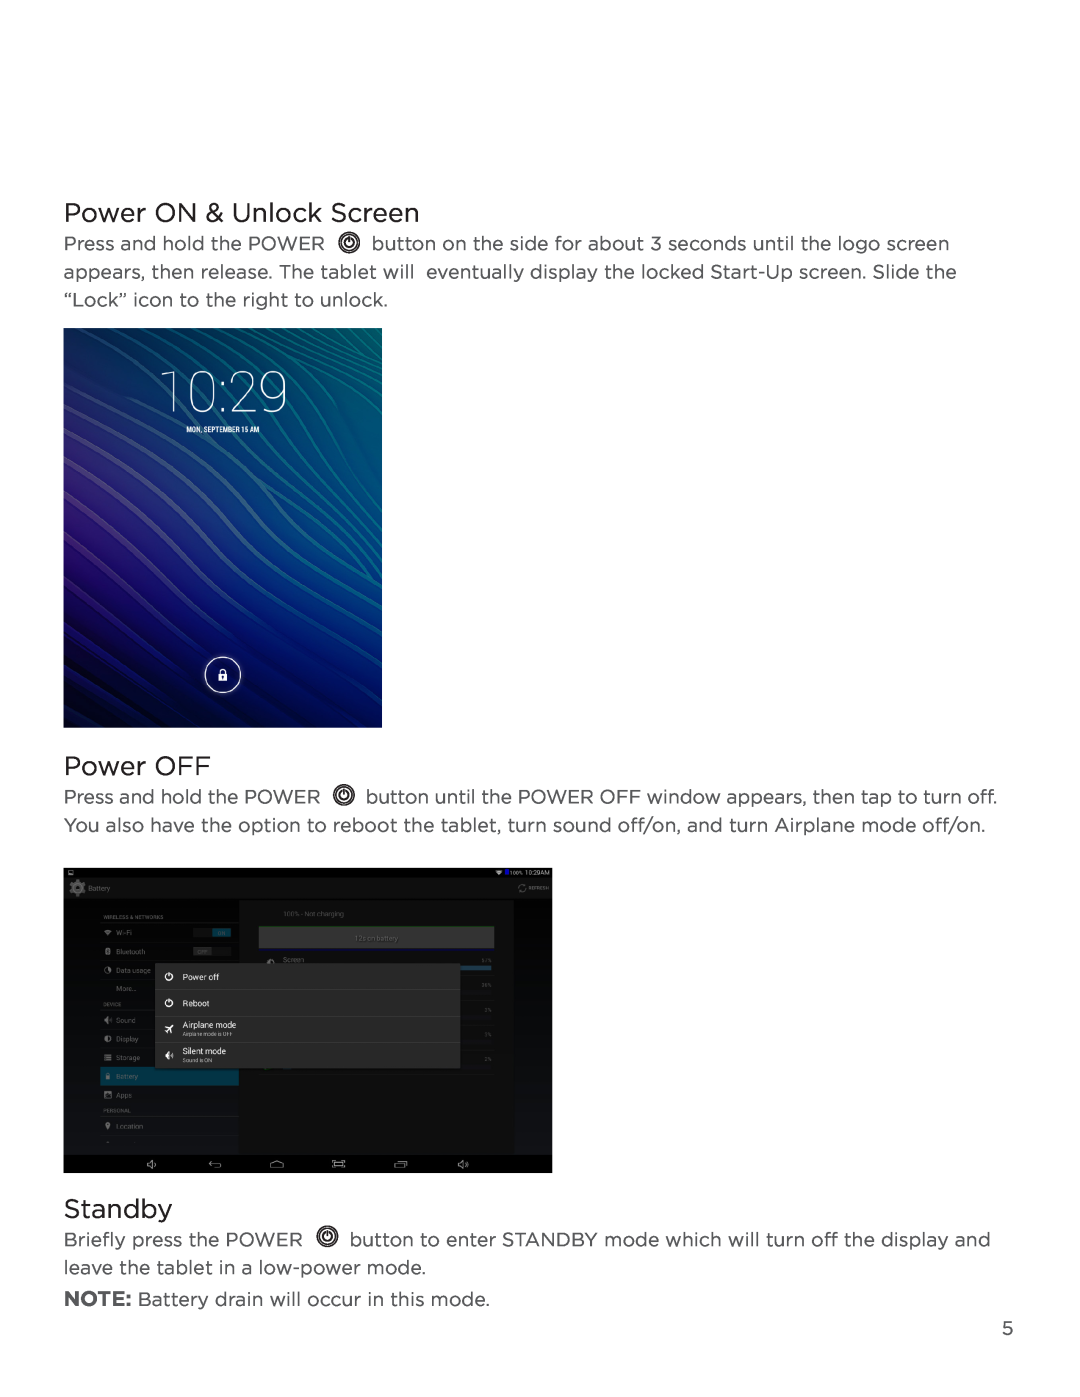 NuVision TM1218 user manual Power ON & Unlock Screen, Power OFF, Standby 